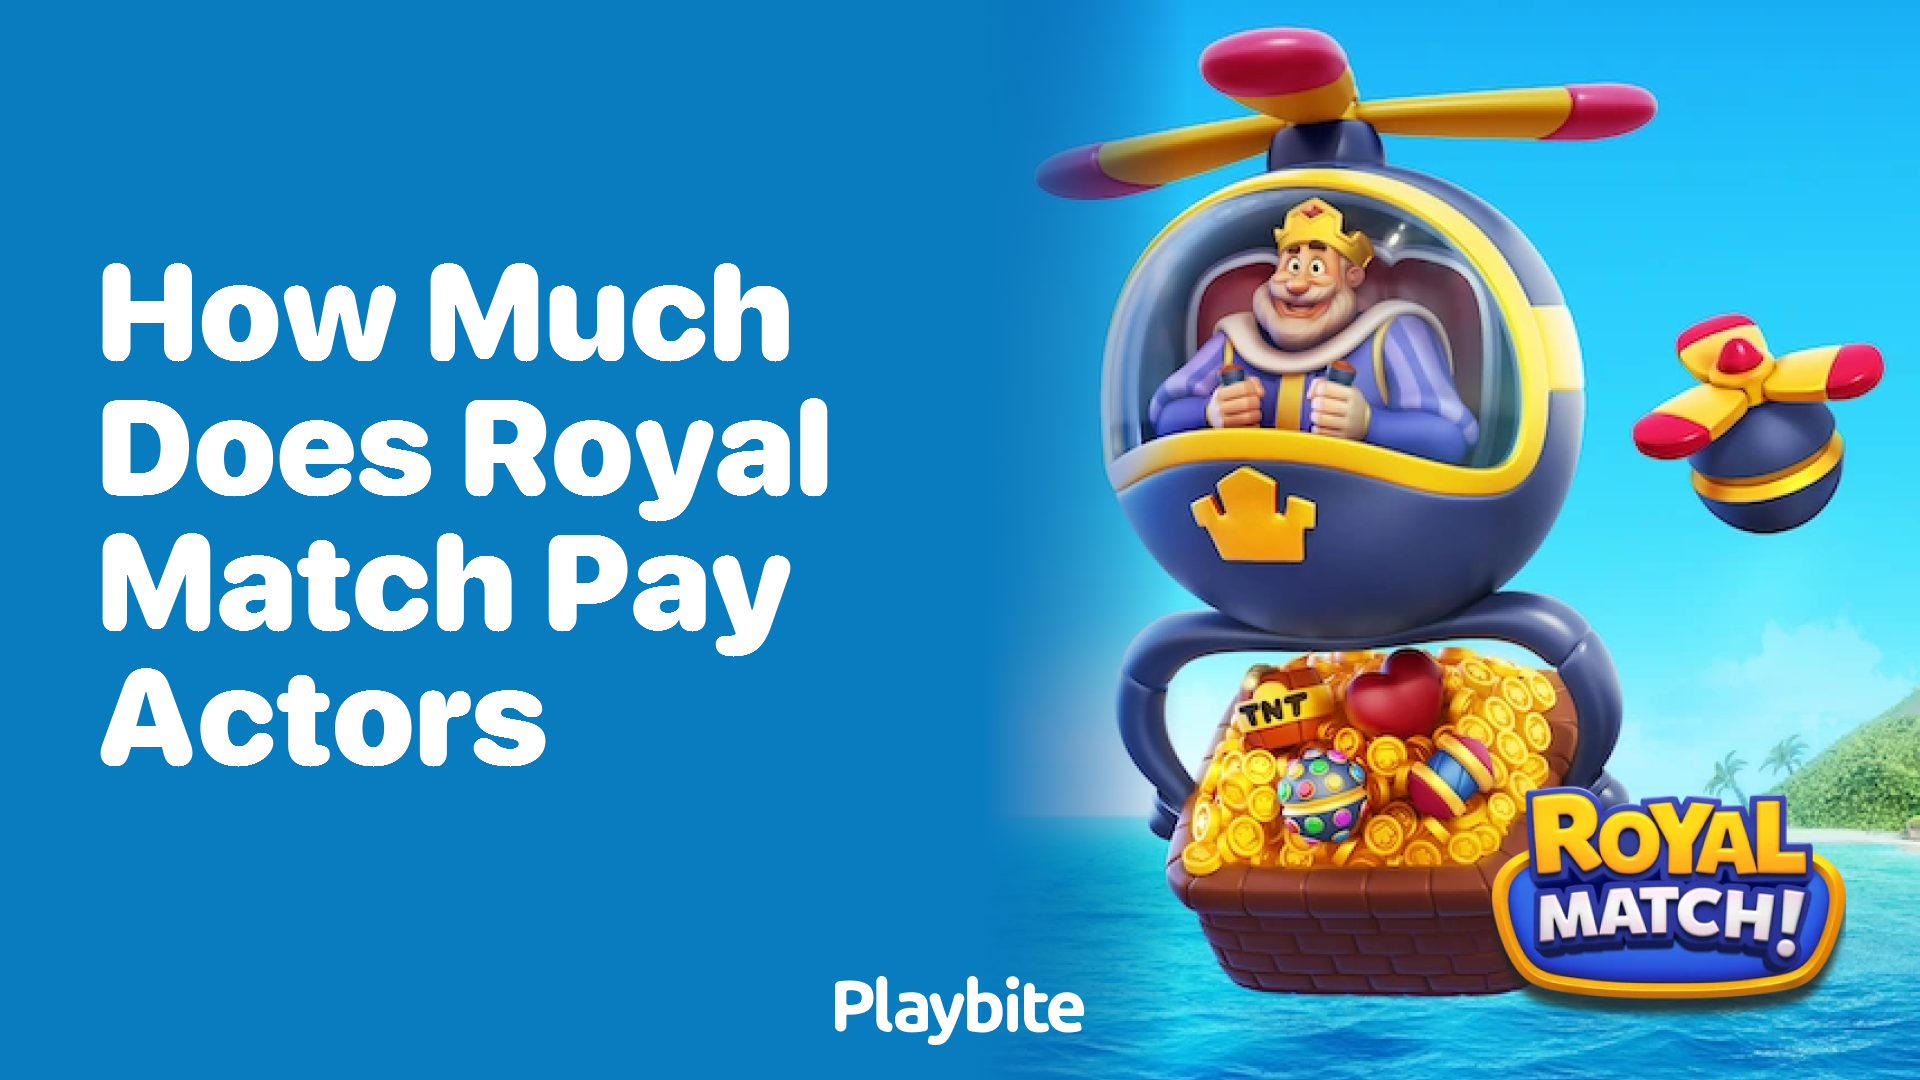 How Much Does Royal Match Pay Actors for Promotional Videos?